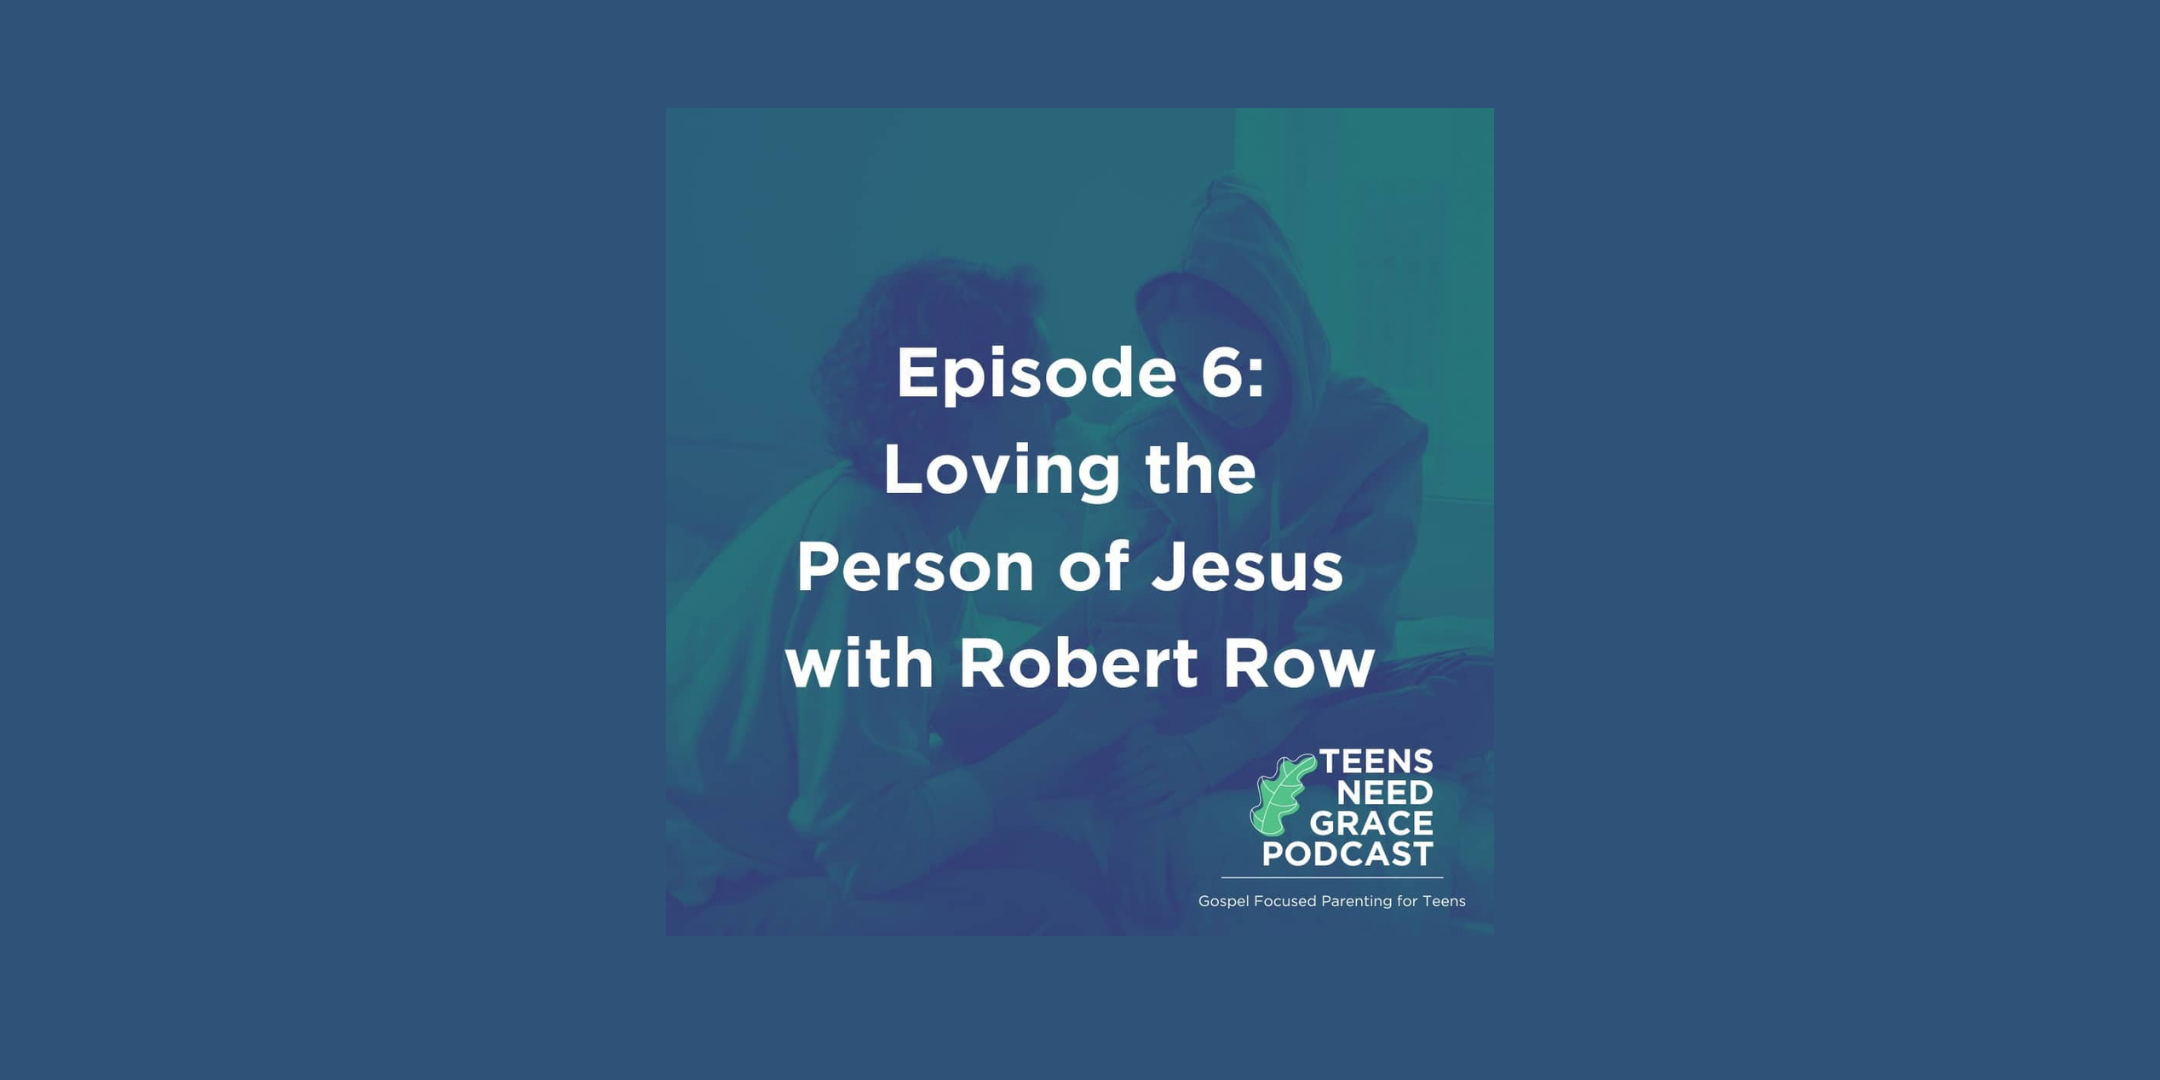 Loving the Person of Jesus with Robert Row